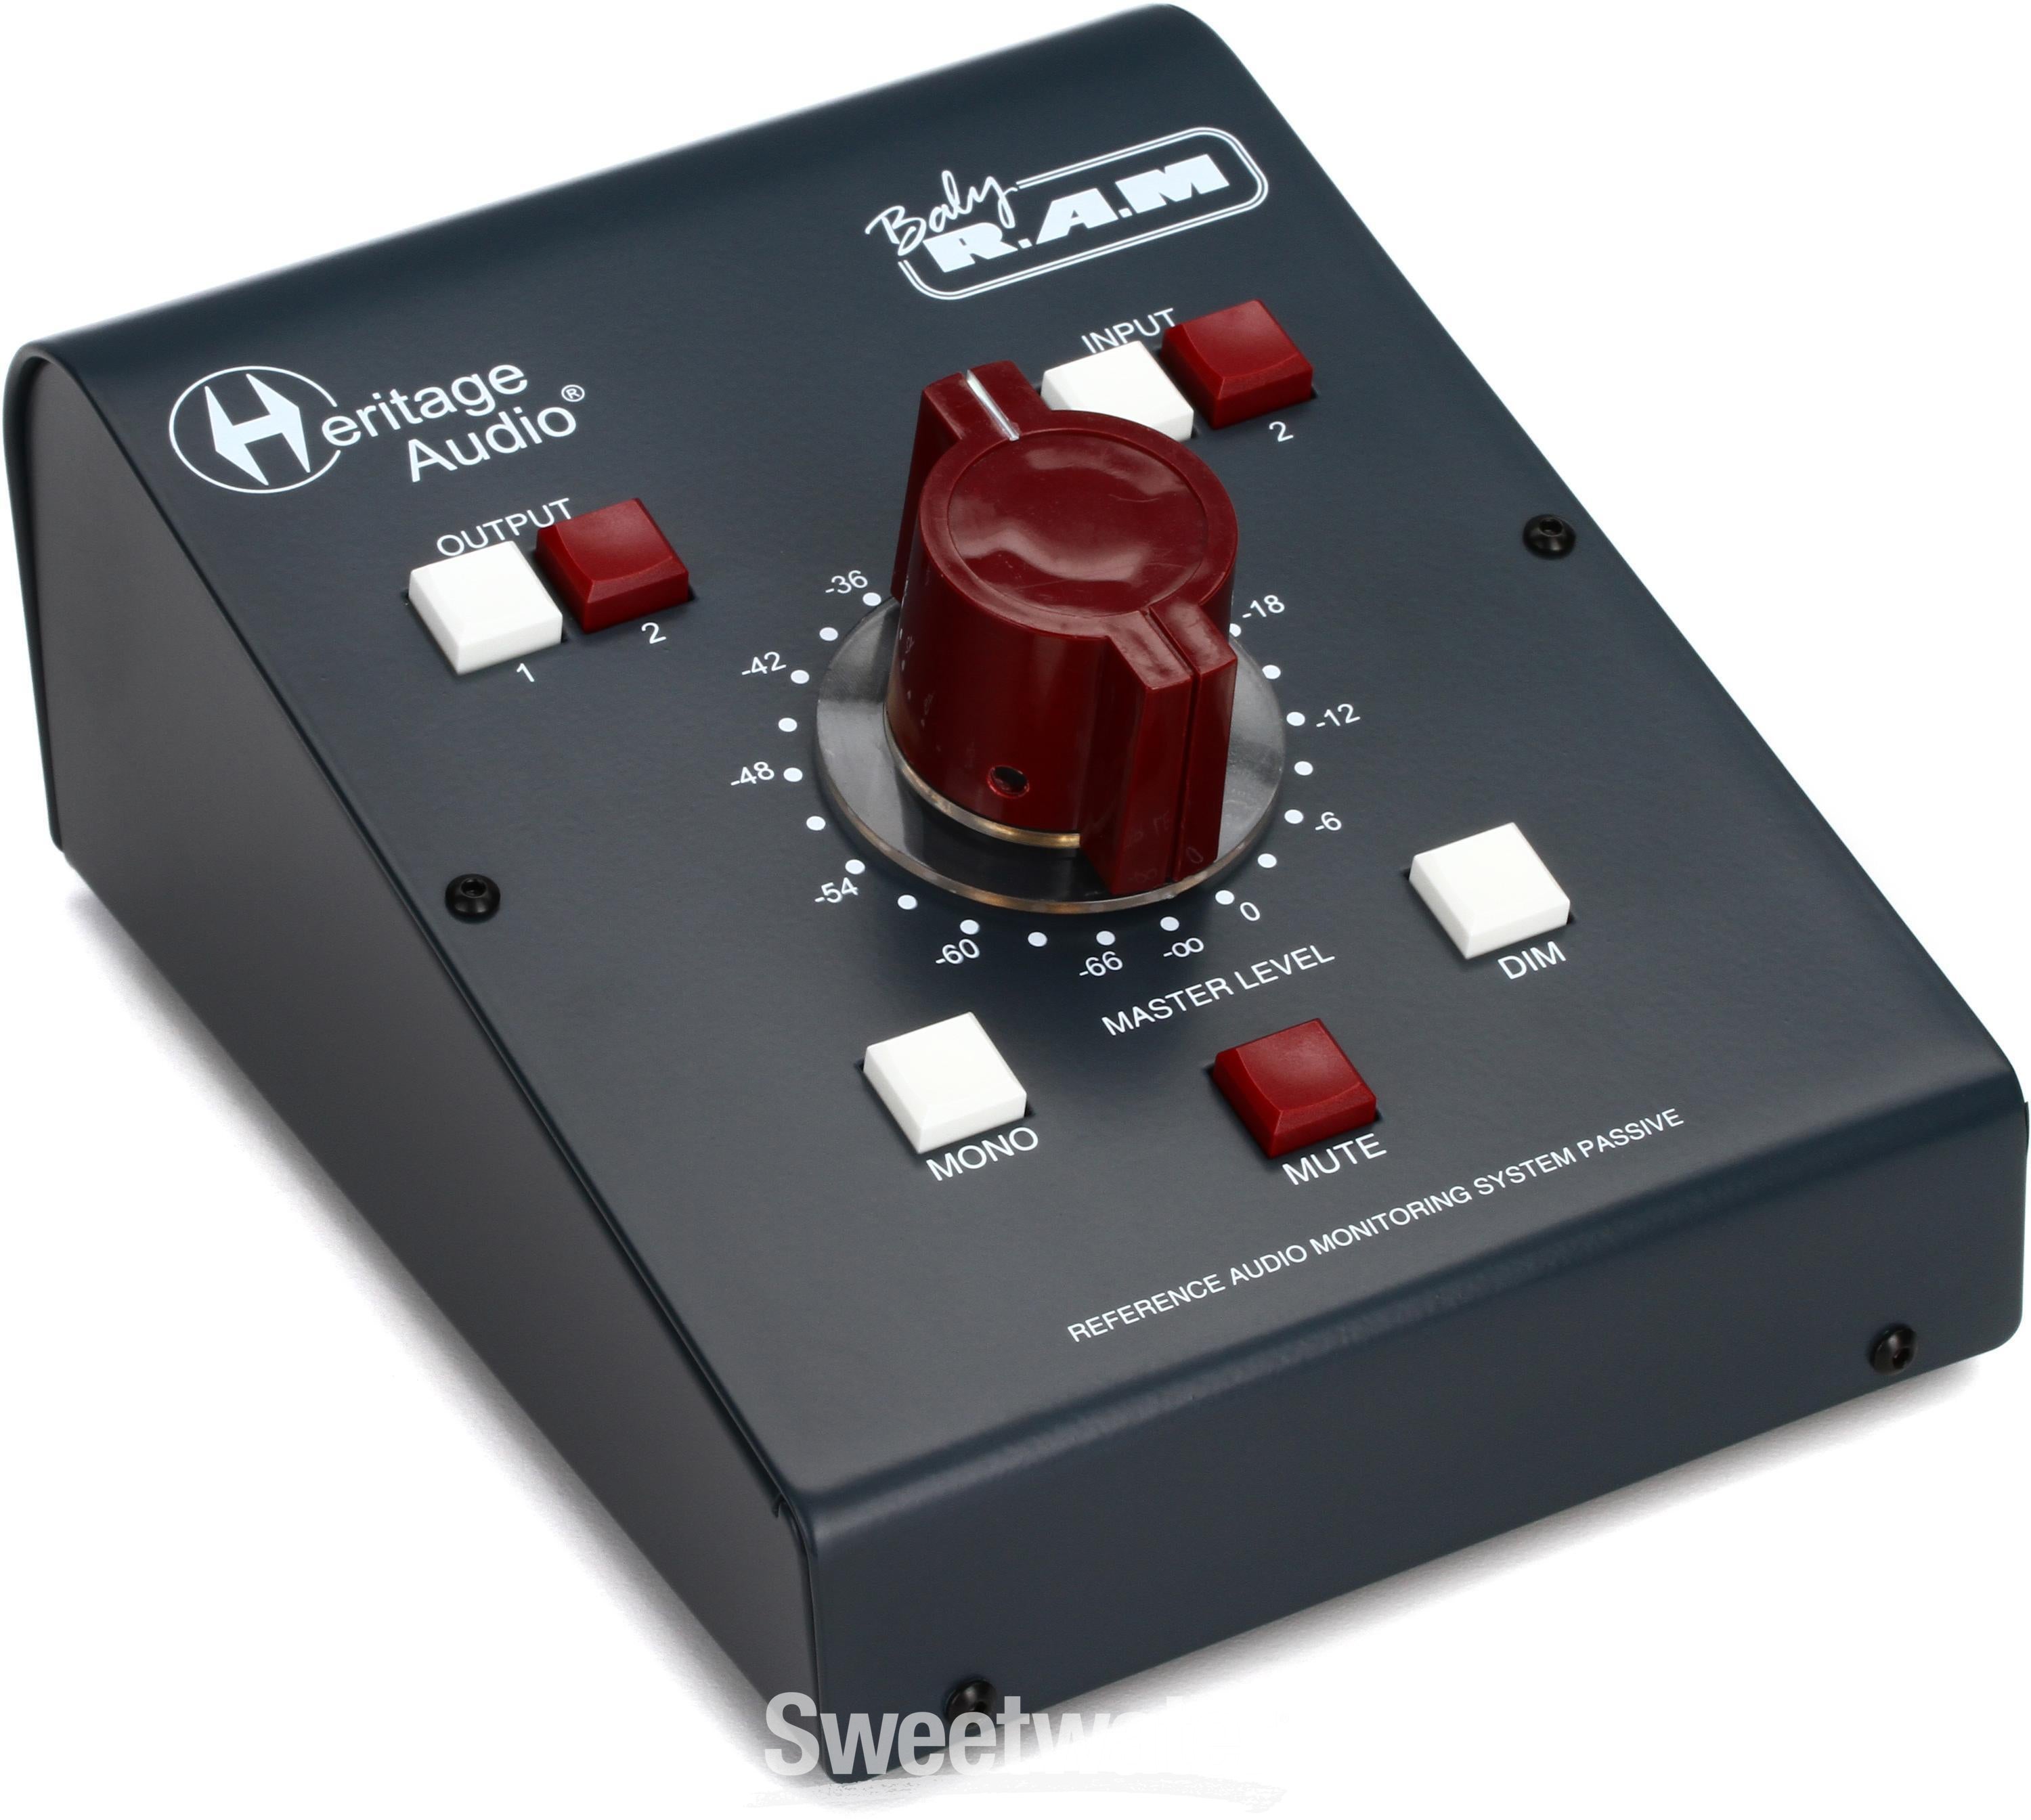 Heritage Audio Baby RAM 2-channel Monitoring System | Sweetwater